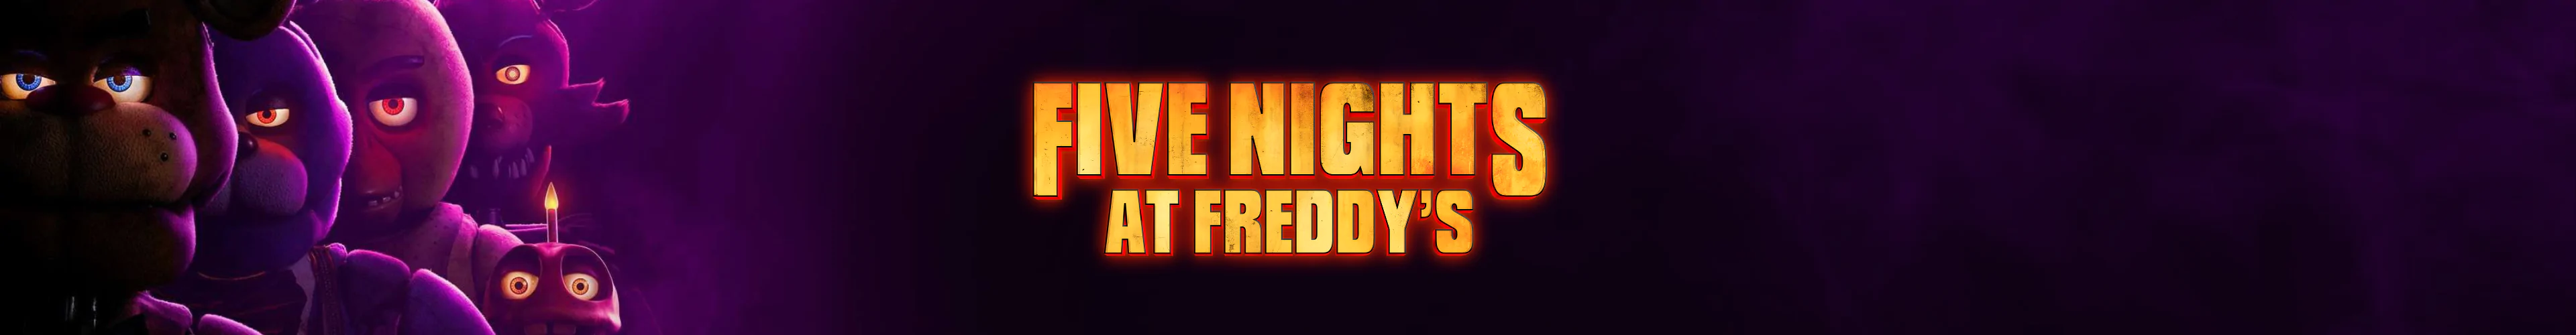 Five Nights at Freddy's products banner